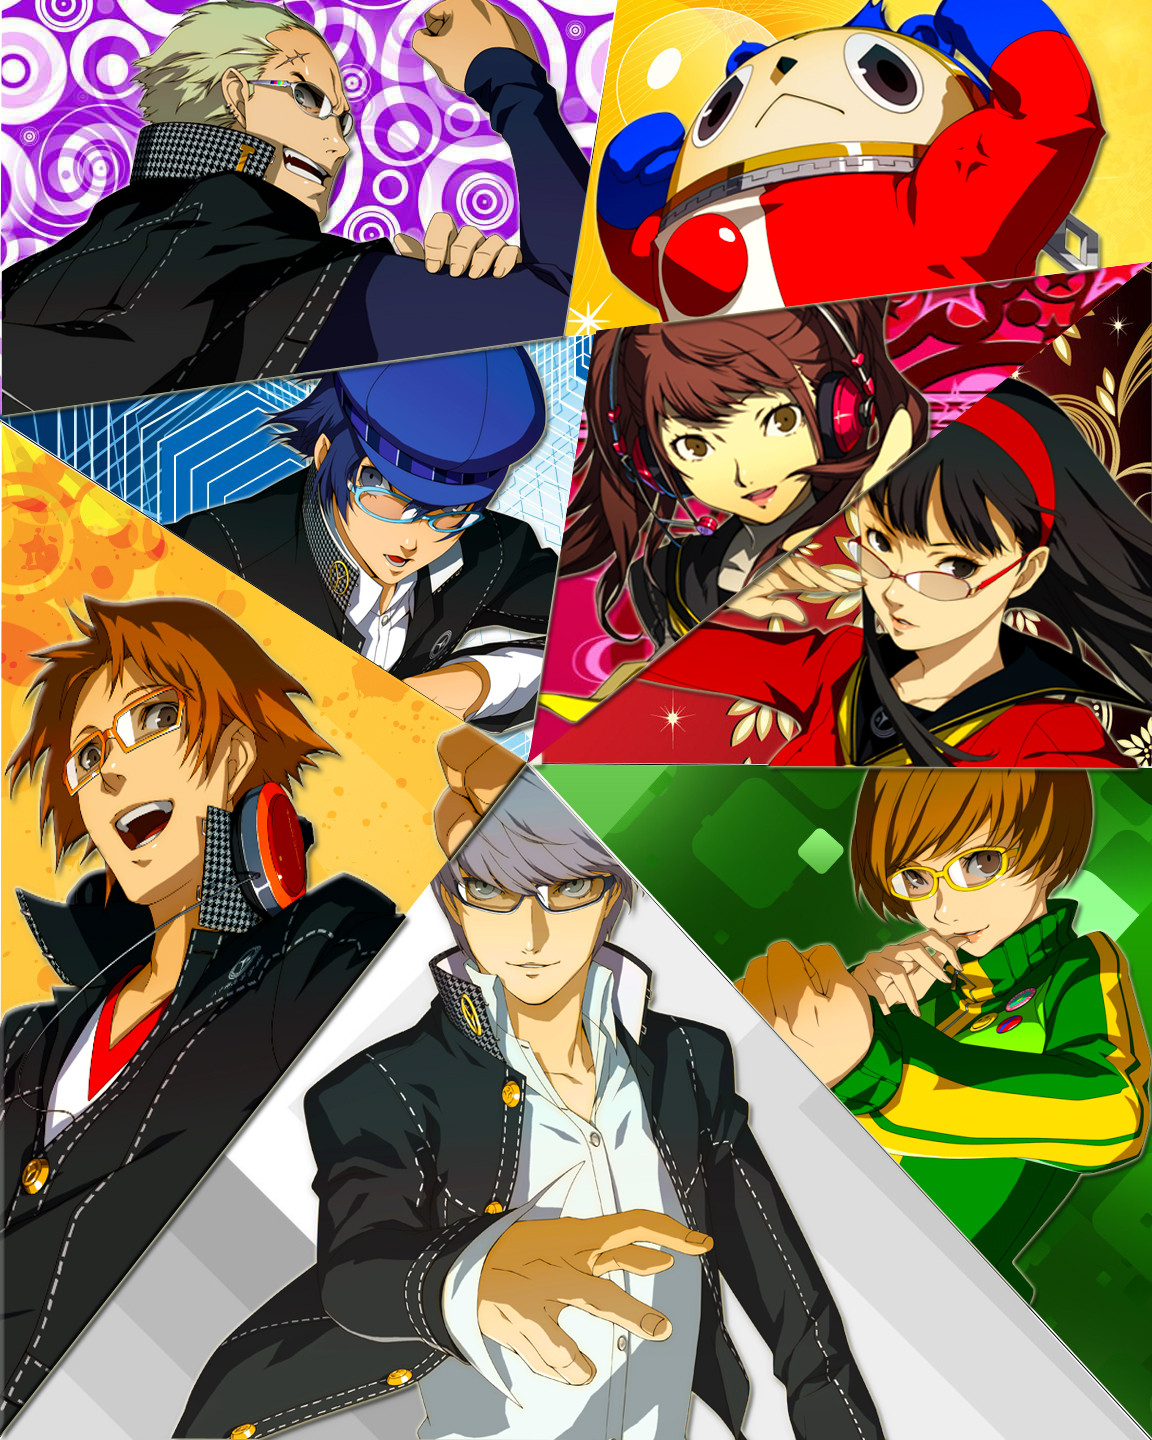 persona 4 phone wallpapers Wallpapers